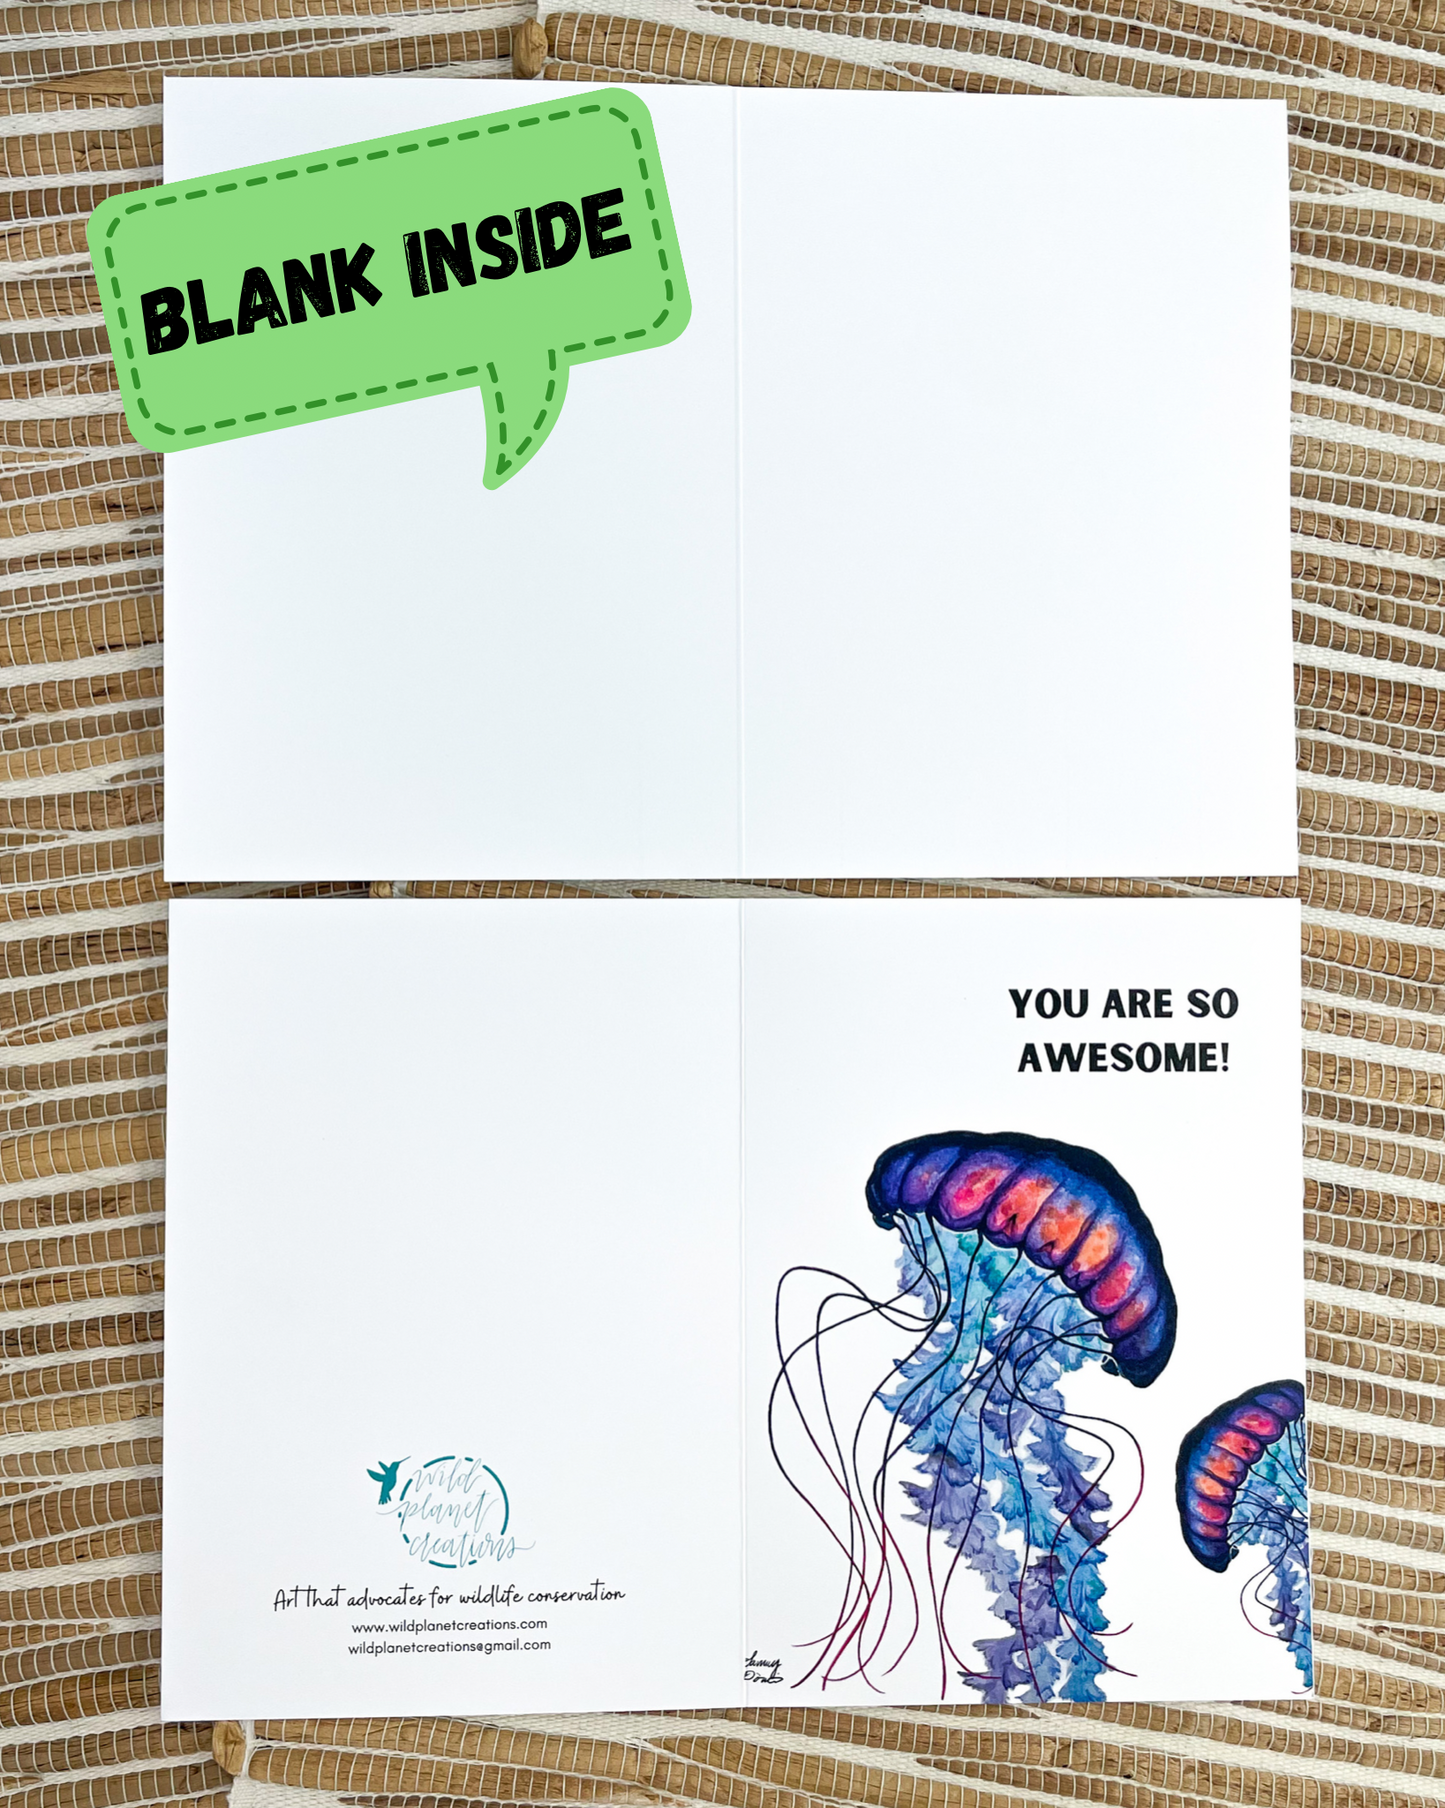 Jellyfish Greeting Card - "You are so awesome!"